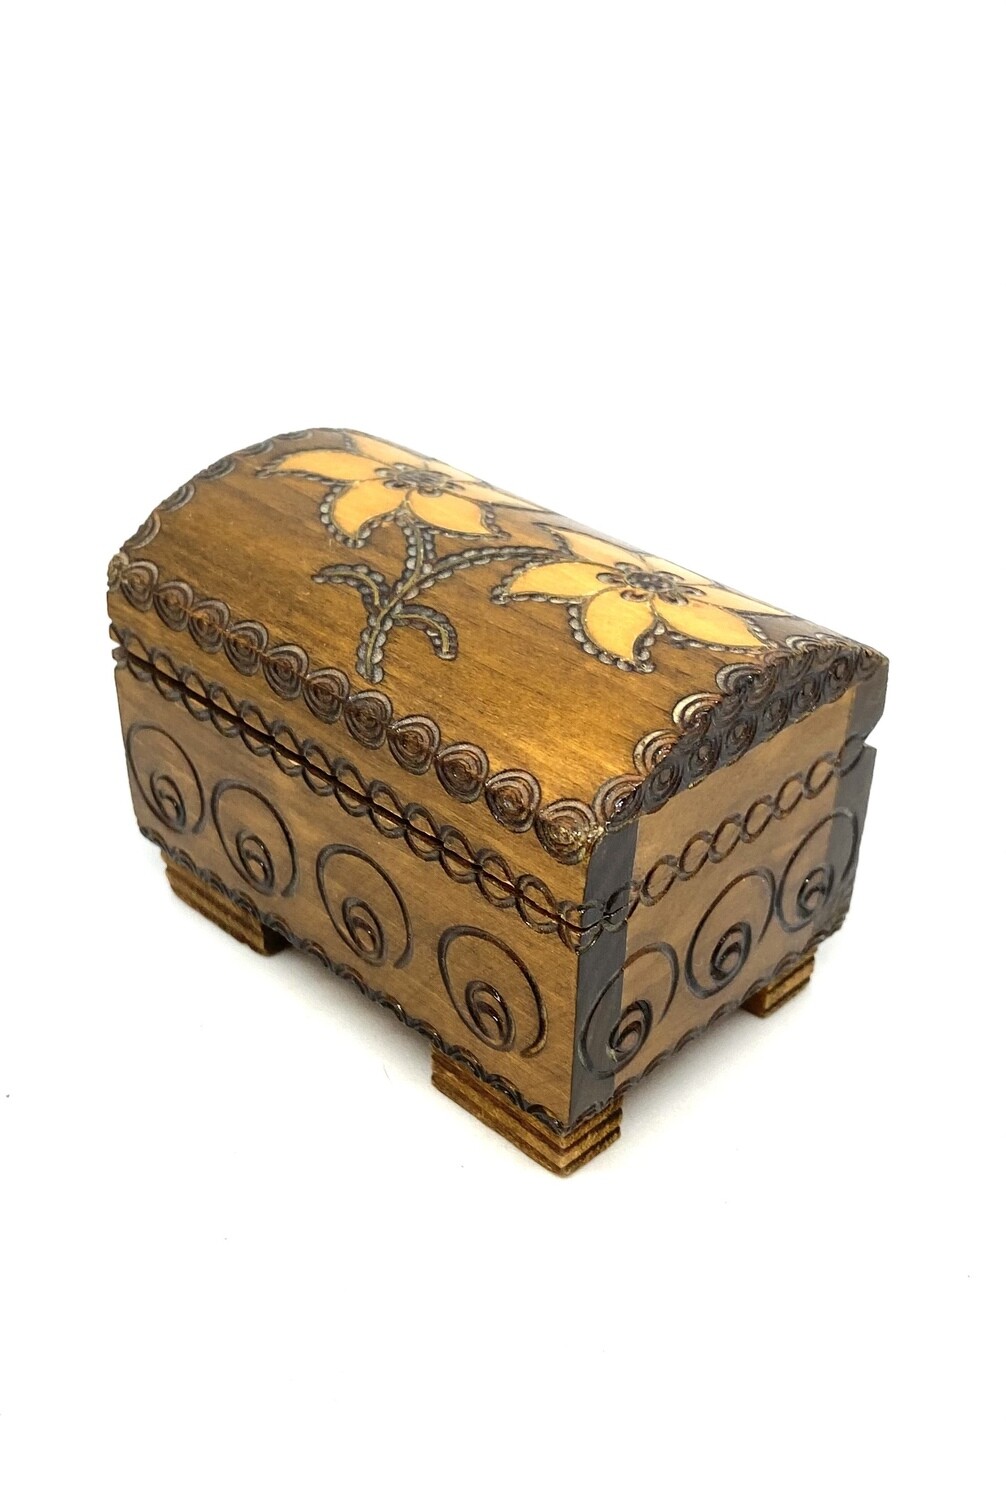 Carved Wooden Chest/Trinket Box